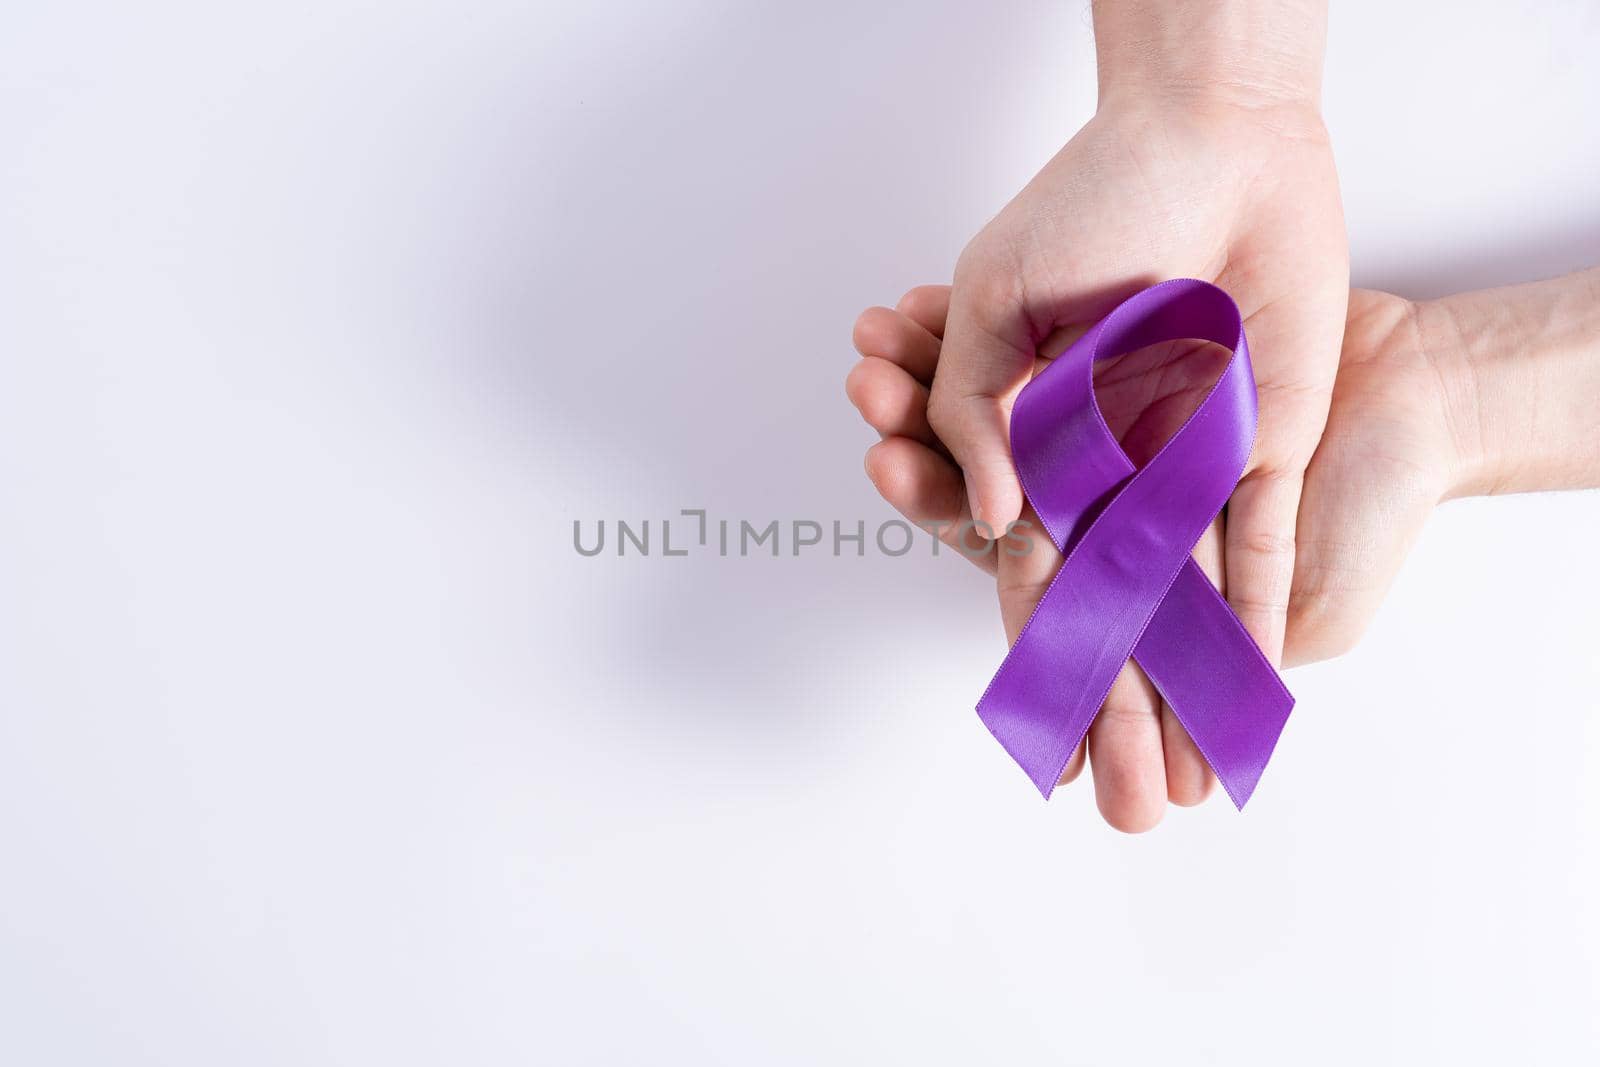 World cancer day, hands holding purple ribbon on grey background with copy space for text. Healthcare and medical concept.